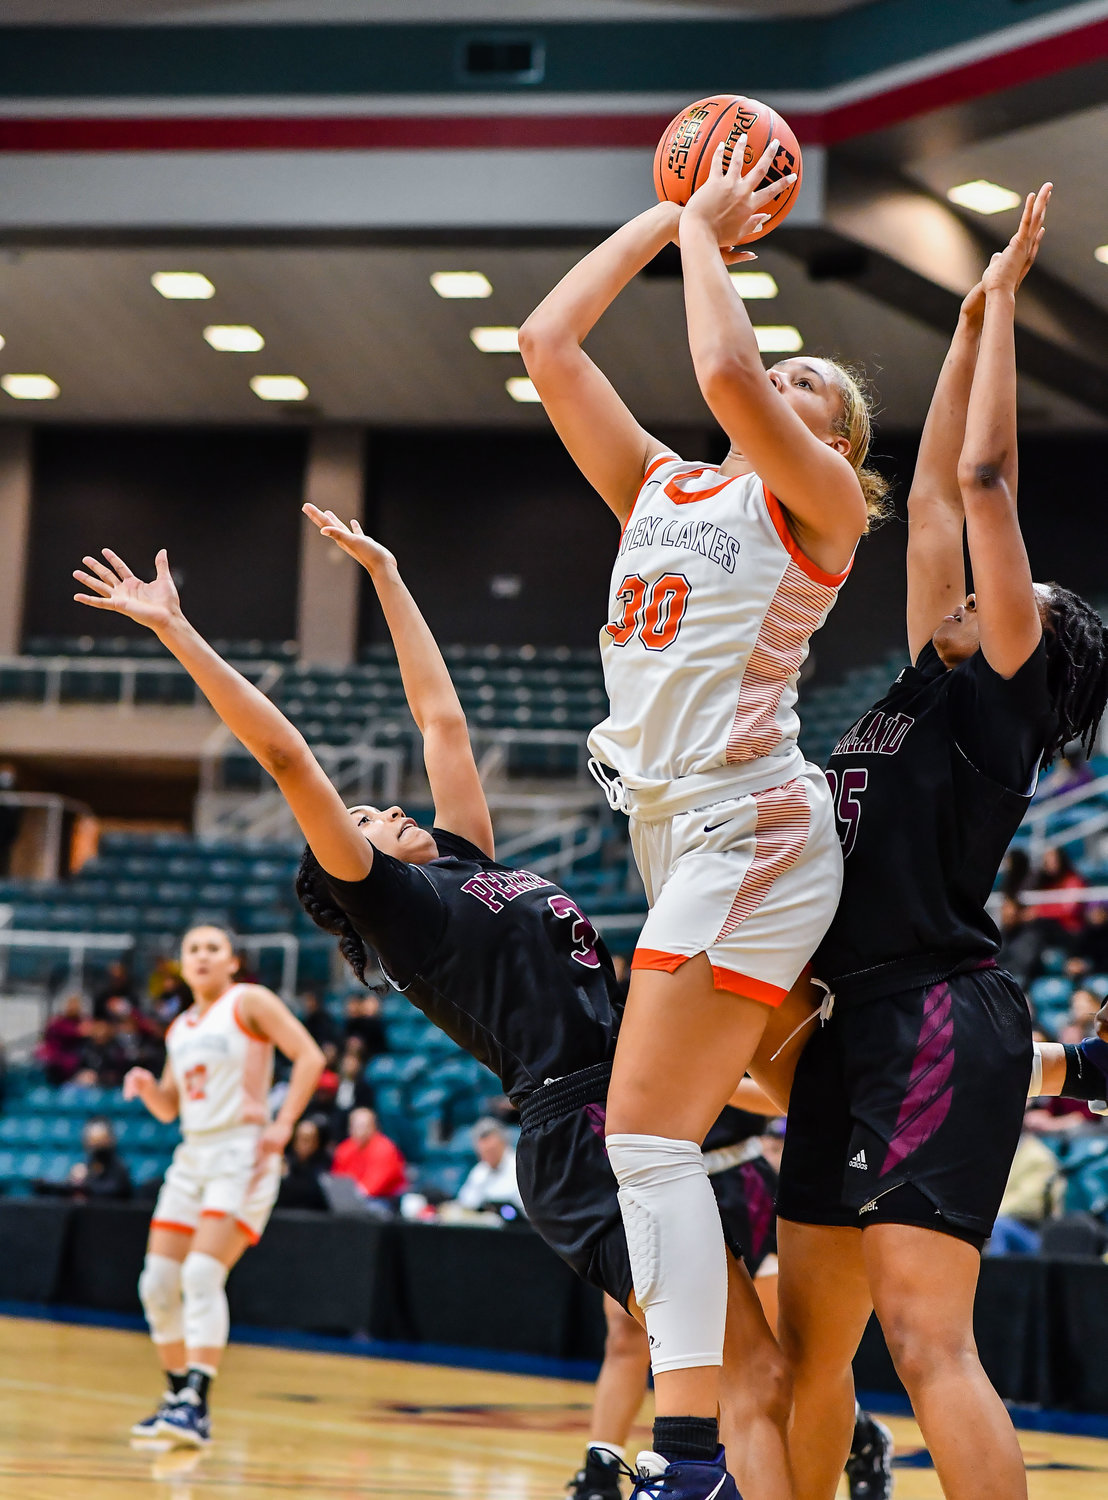 Katy Tx. Feb 25, 2022:  Seven Lakes Justice Carlton #30 goes up for the shot between two Pearland defenders during the Regional SemiFinal playoff game, Seven Lakes vs Pearland at the Merrell Center. (Photo by Mark Goodman / Katy Times)